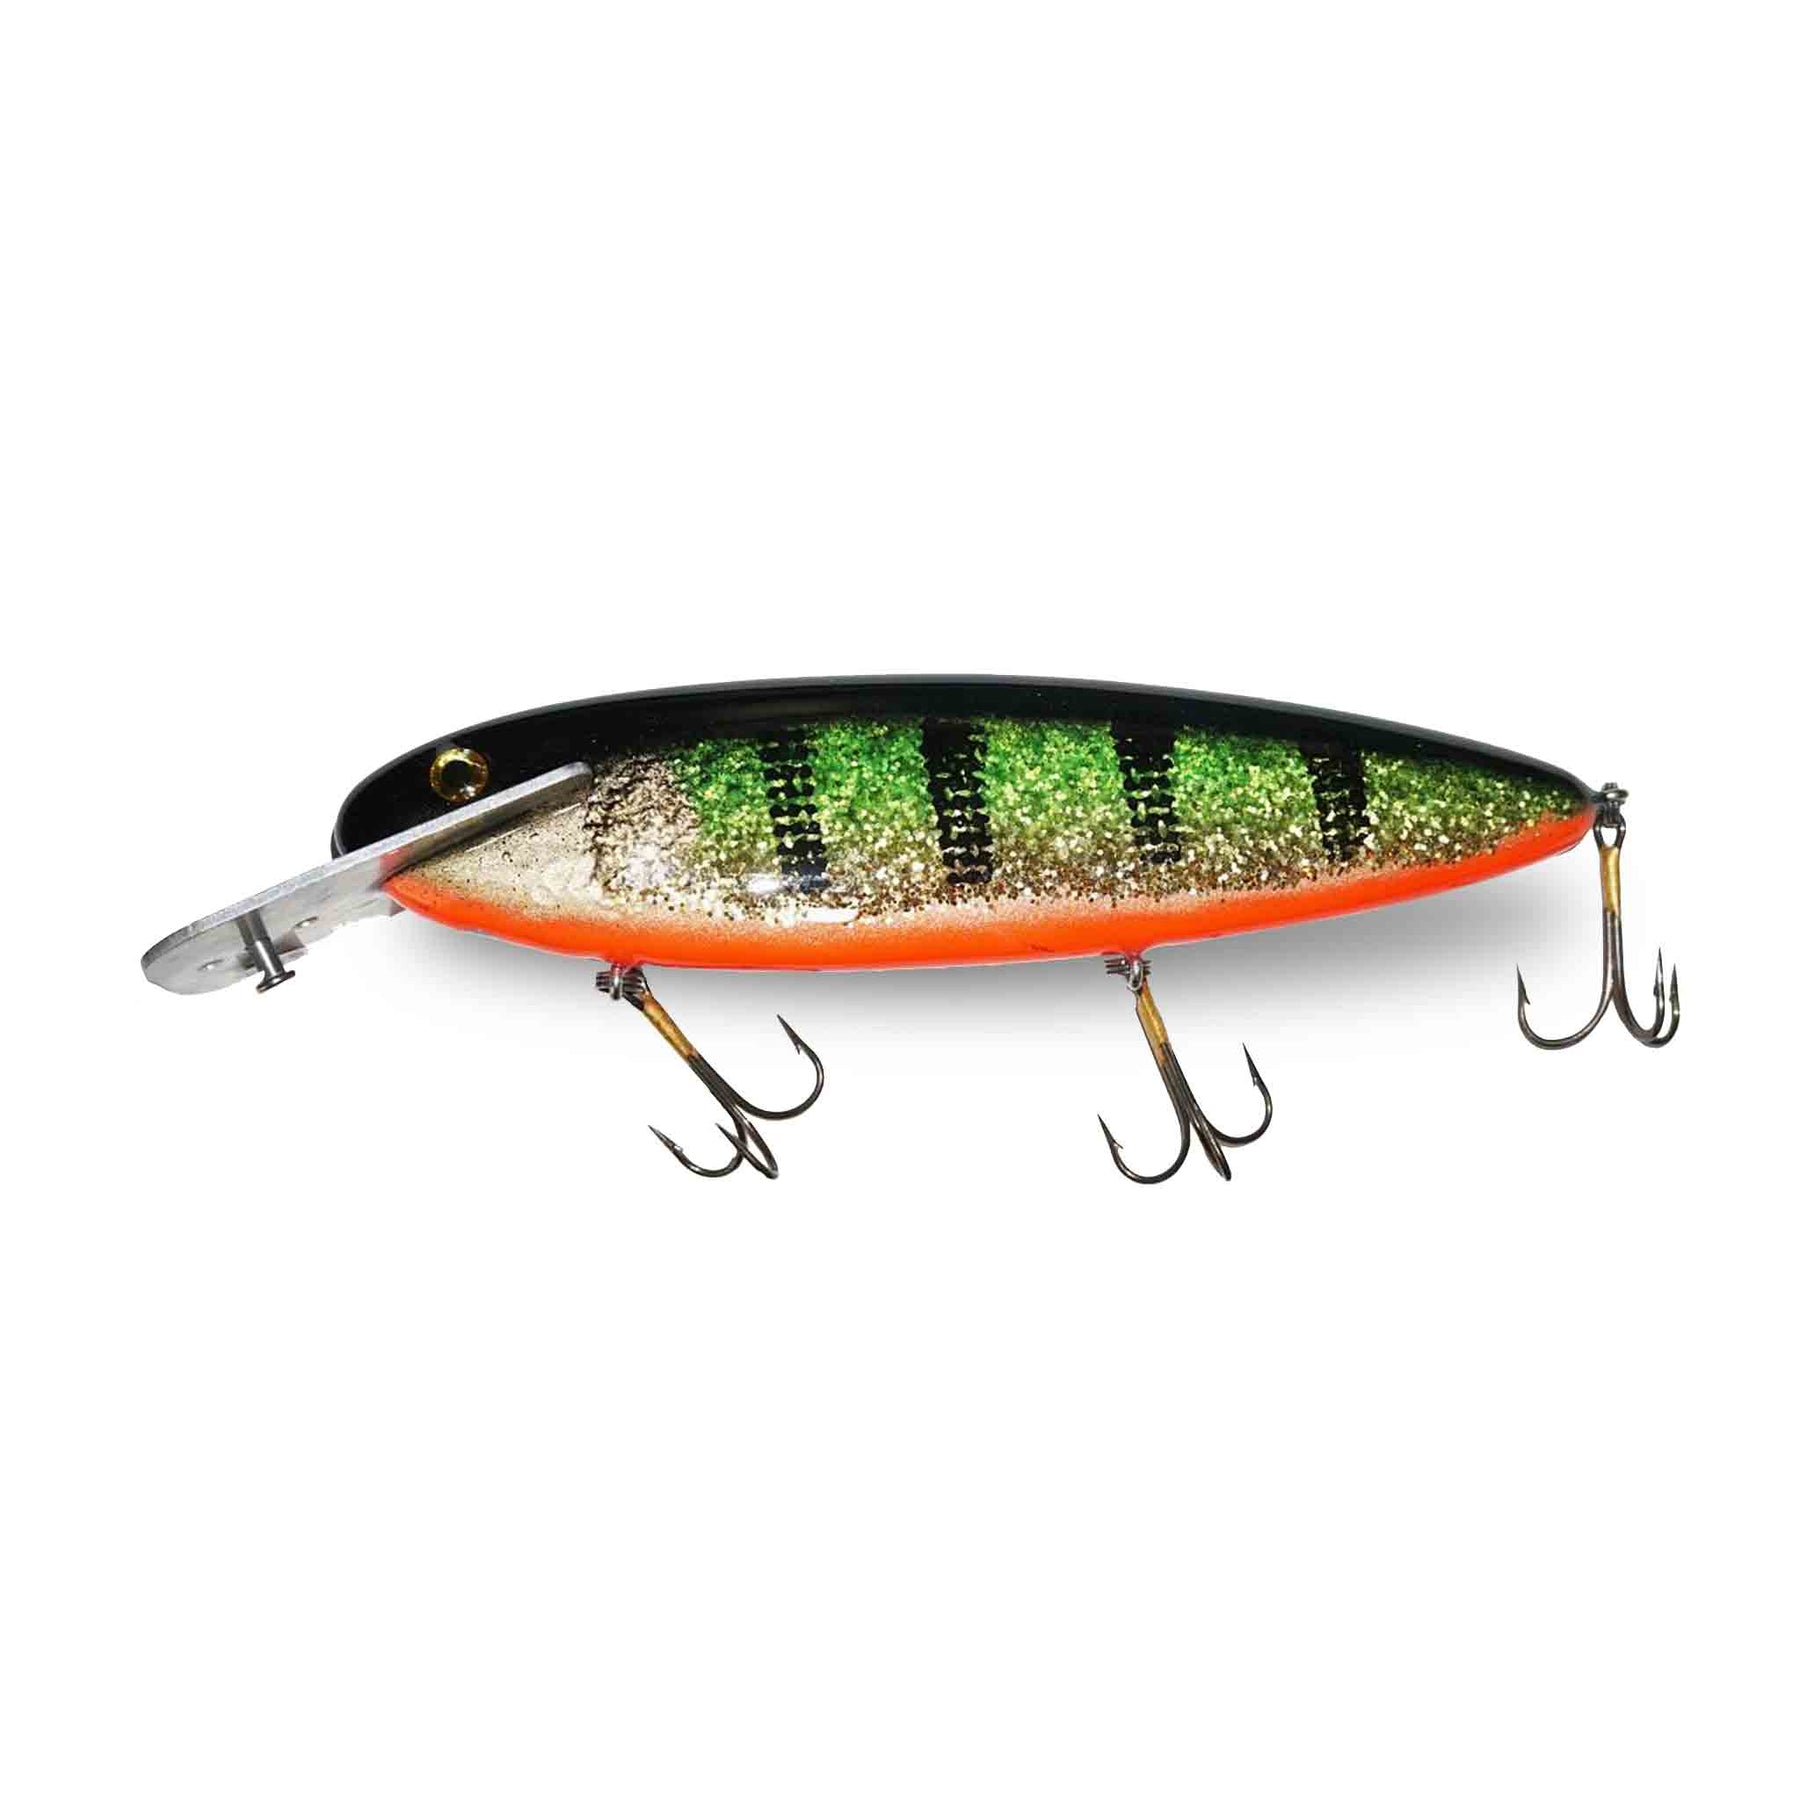 View of Crankbaits Supernatural Big Baits HeadLock 10" Orange Belly Glitter Perch available at EZOKO Pike and Musky Shop